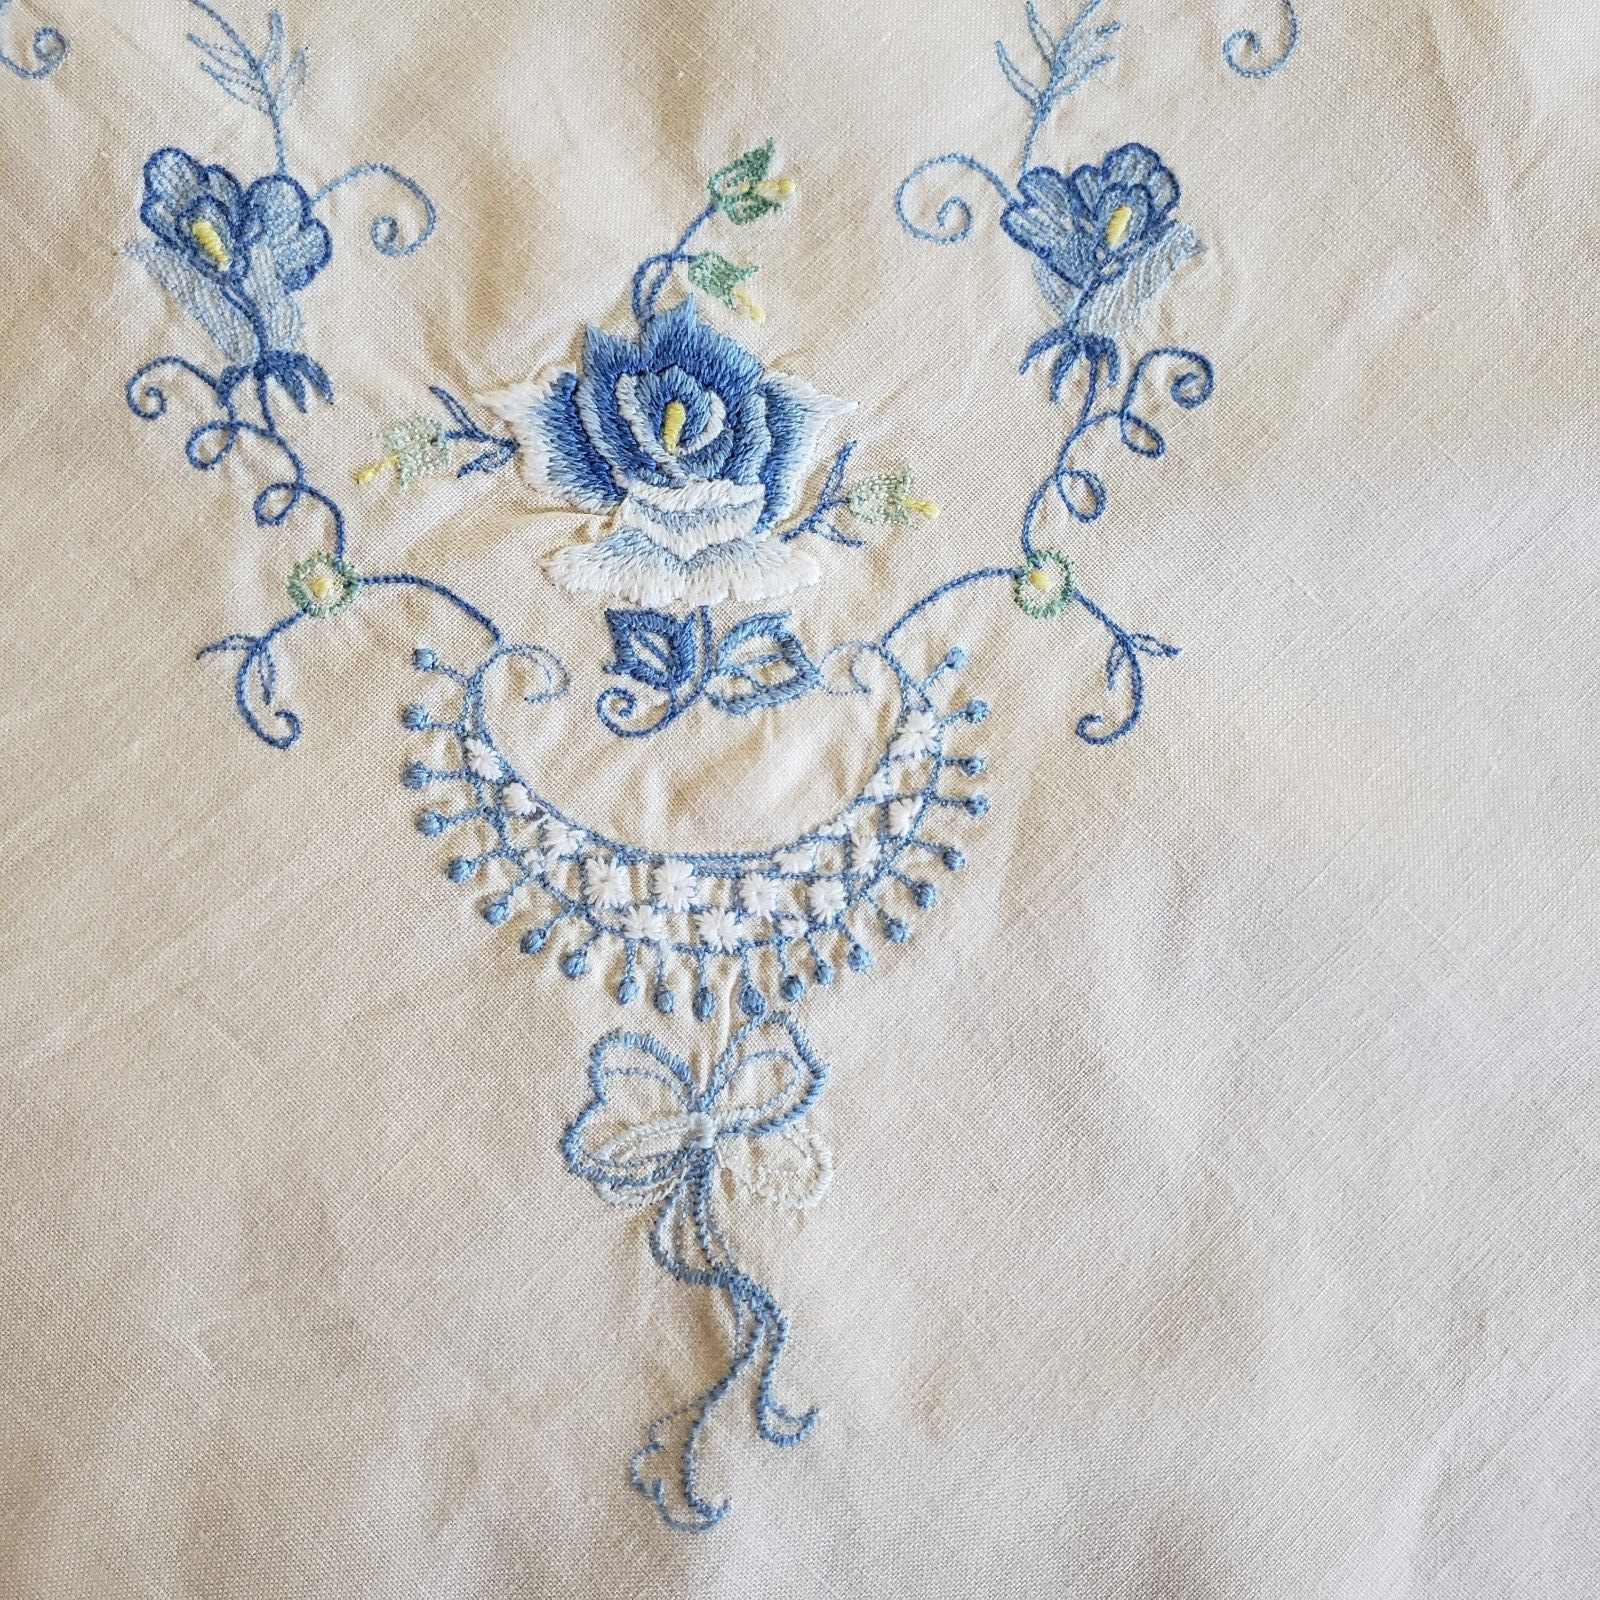 Small Square Cotton Table Cloth Embroidered Blue Roses Floral Scalloped Edge